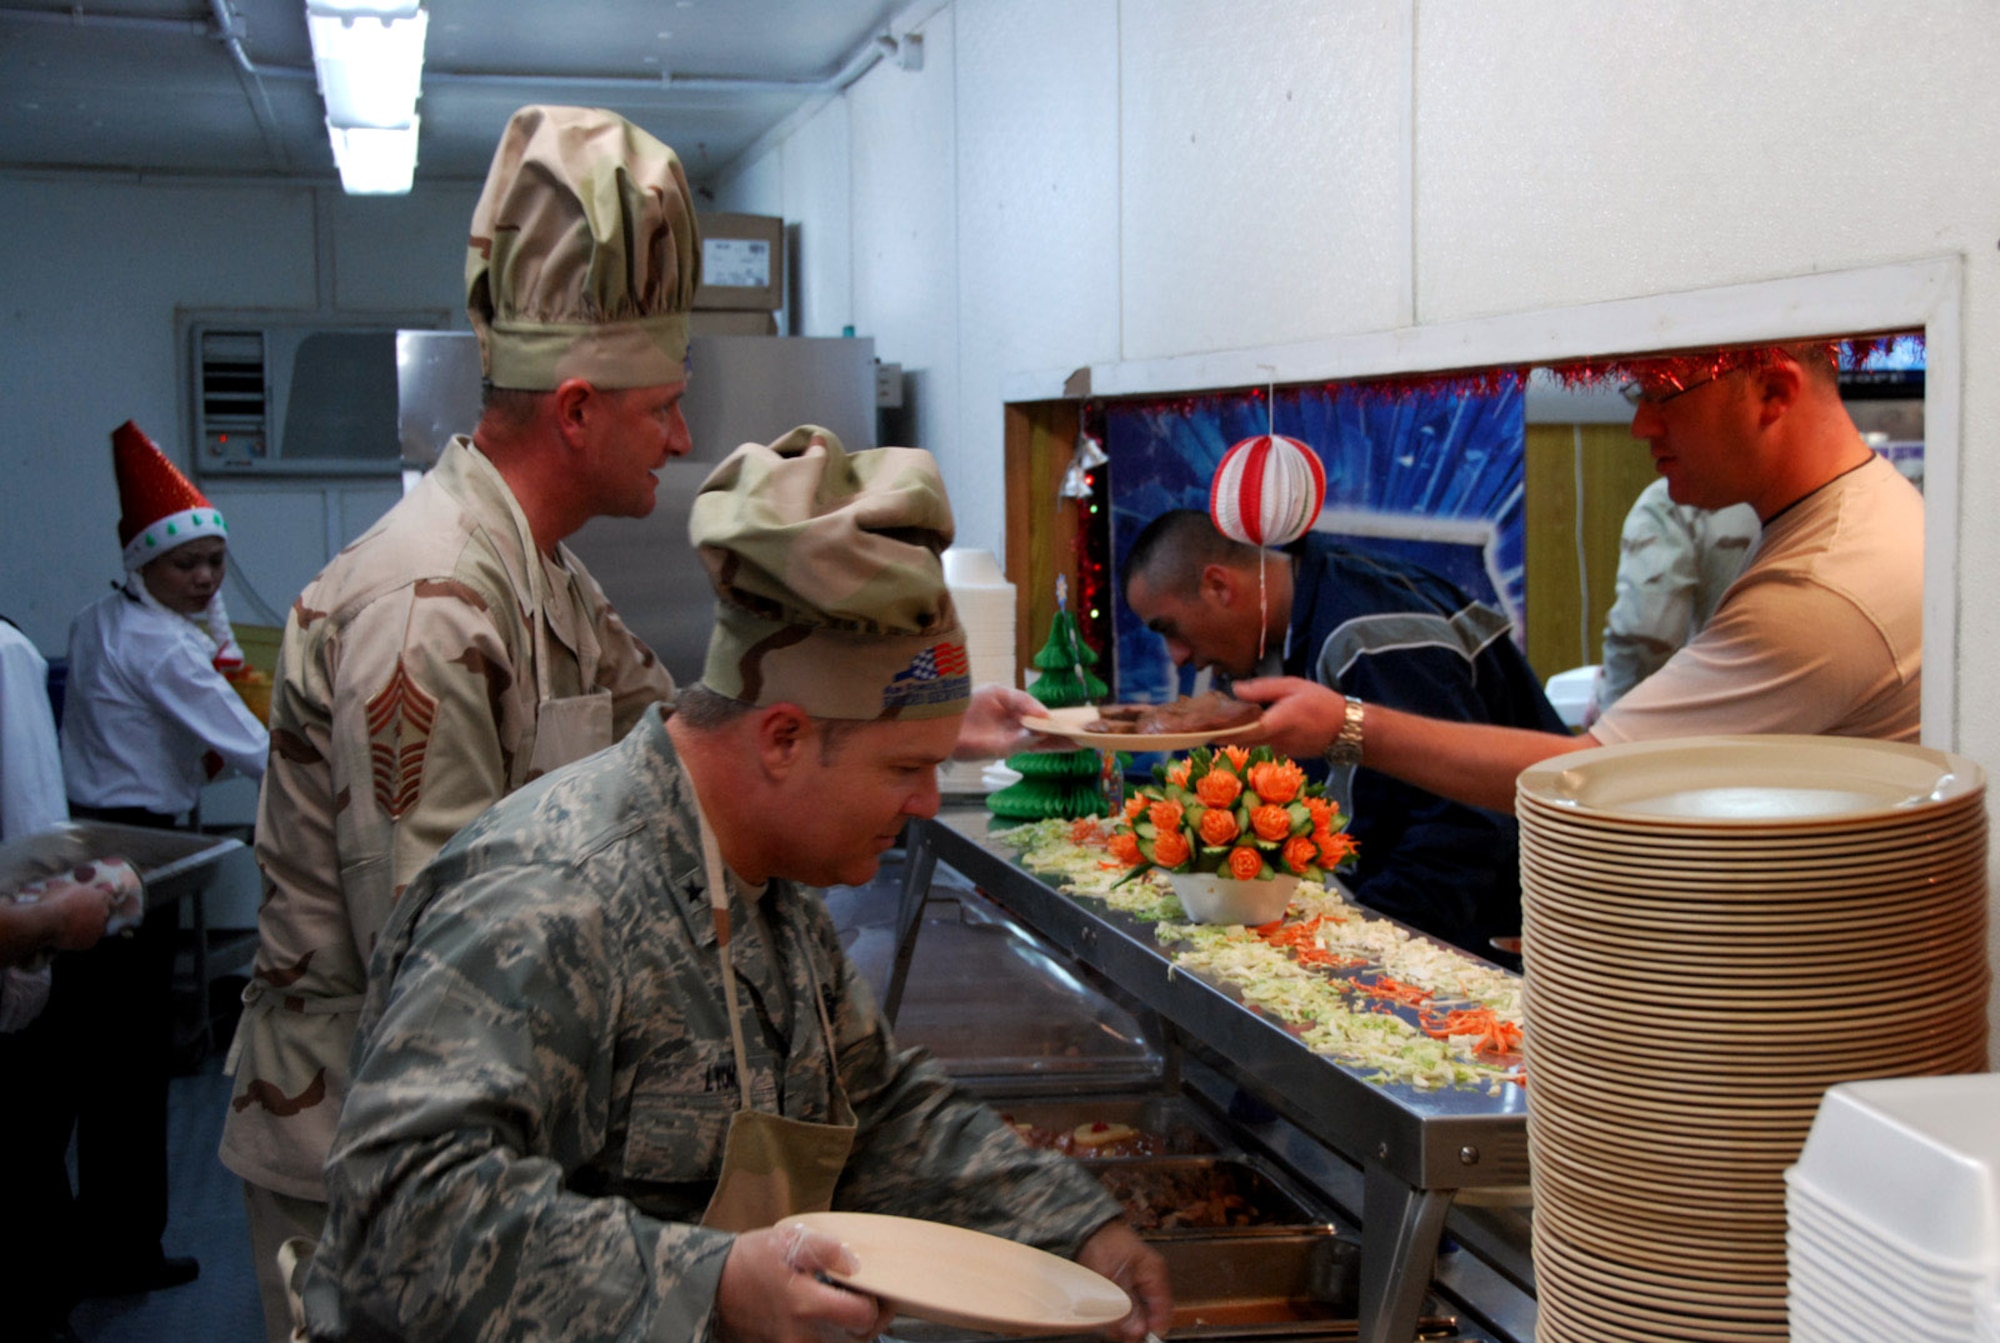 Brig. Gen. Charles W. Lyon and Chief Master Sgt. Lloyd Hollen serve dinner to deployed troops Dec. 25 at a Southwest Asia air base. General Lyon is the 379th Air Expeditionary Wing commander, and Chief Hollen is the 379th AEW command chief. (U.S. Air Force photo/Staff Sgt. Douglas Olsen) 
